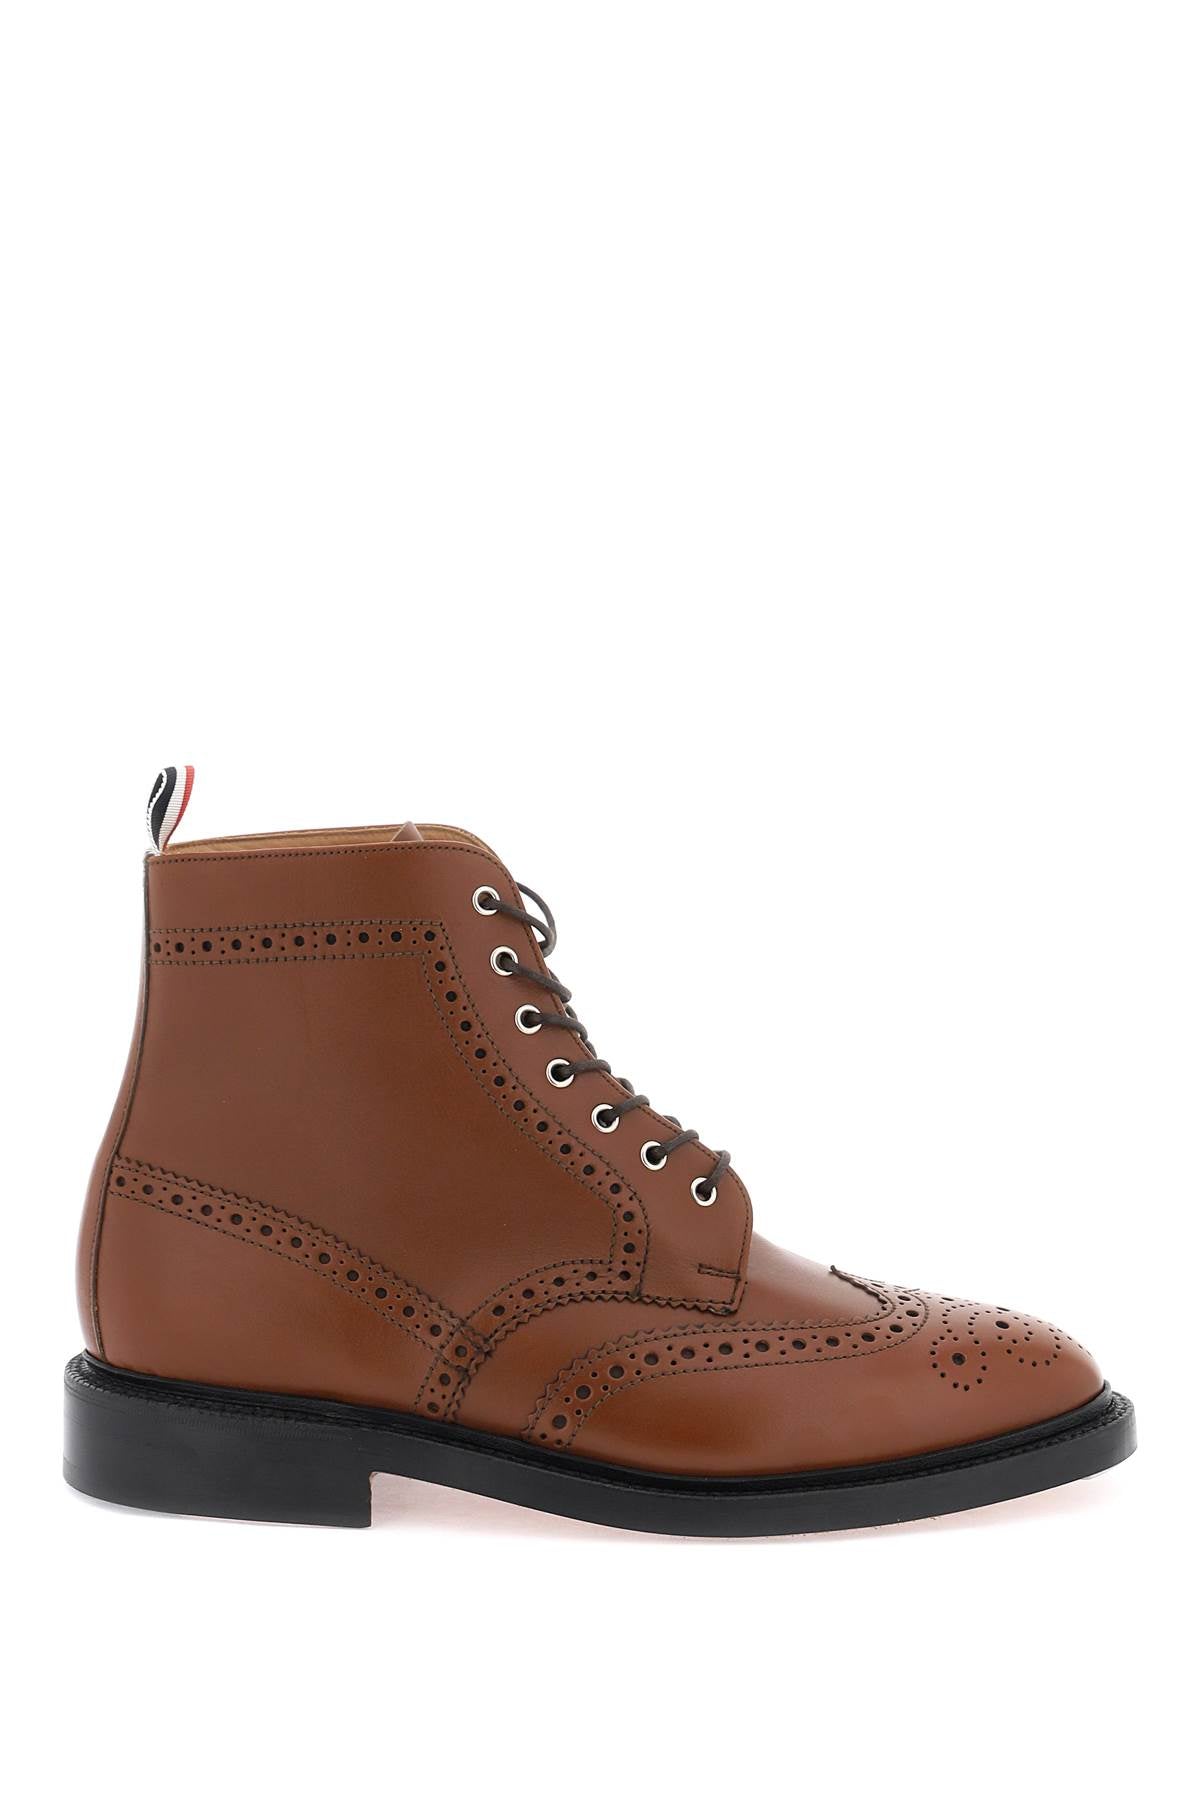 THOM BROWNE Premium Brogue Ankle Boots for Men - Brown Leather SS24